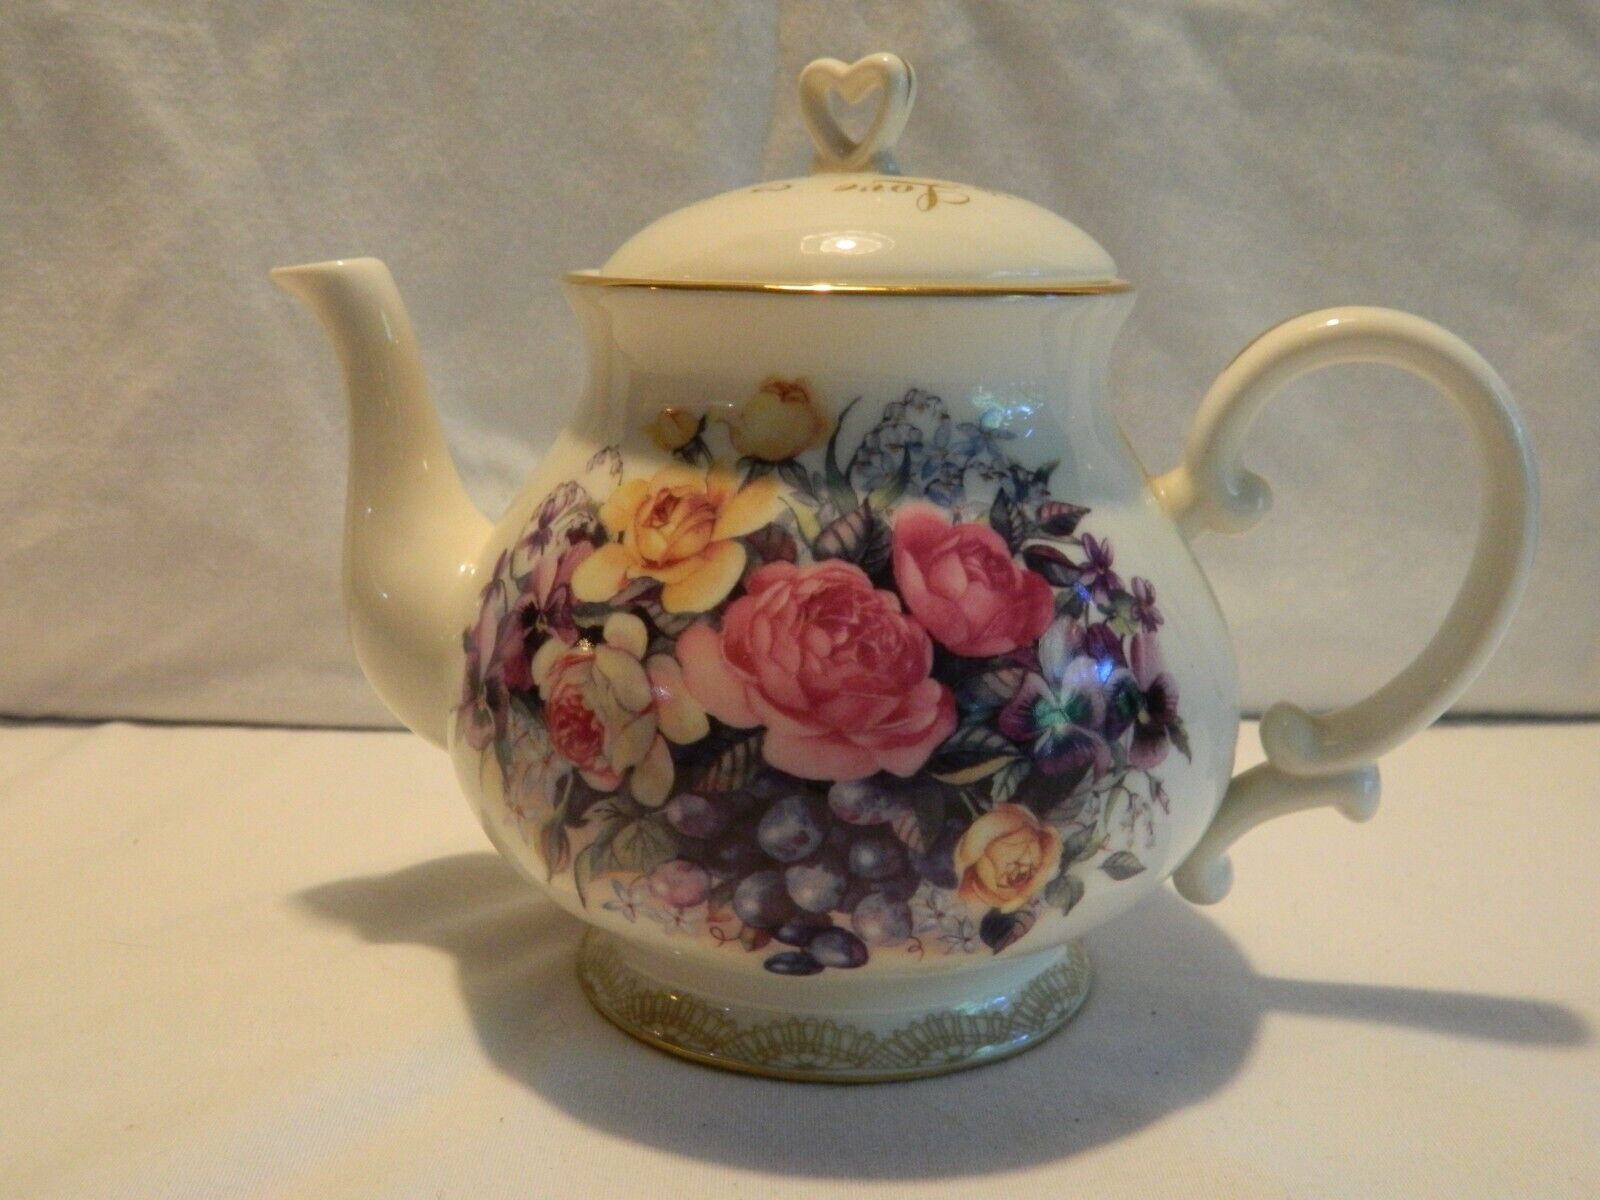 C-24 SANDY CLOUGH ‘THE GREATEST OF THESE IS LOVE’ FLORAL TEAPOT